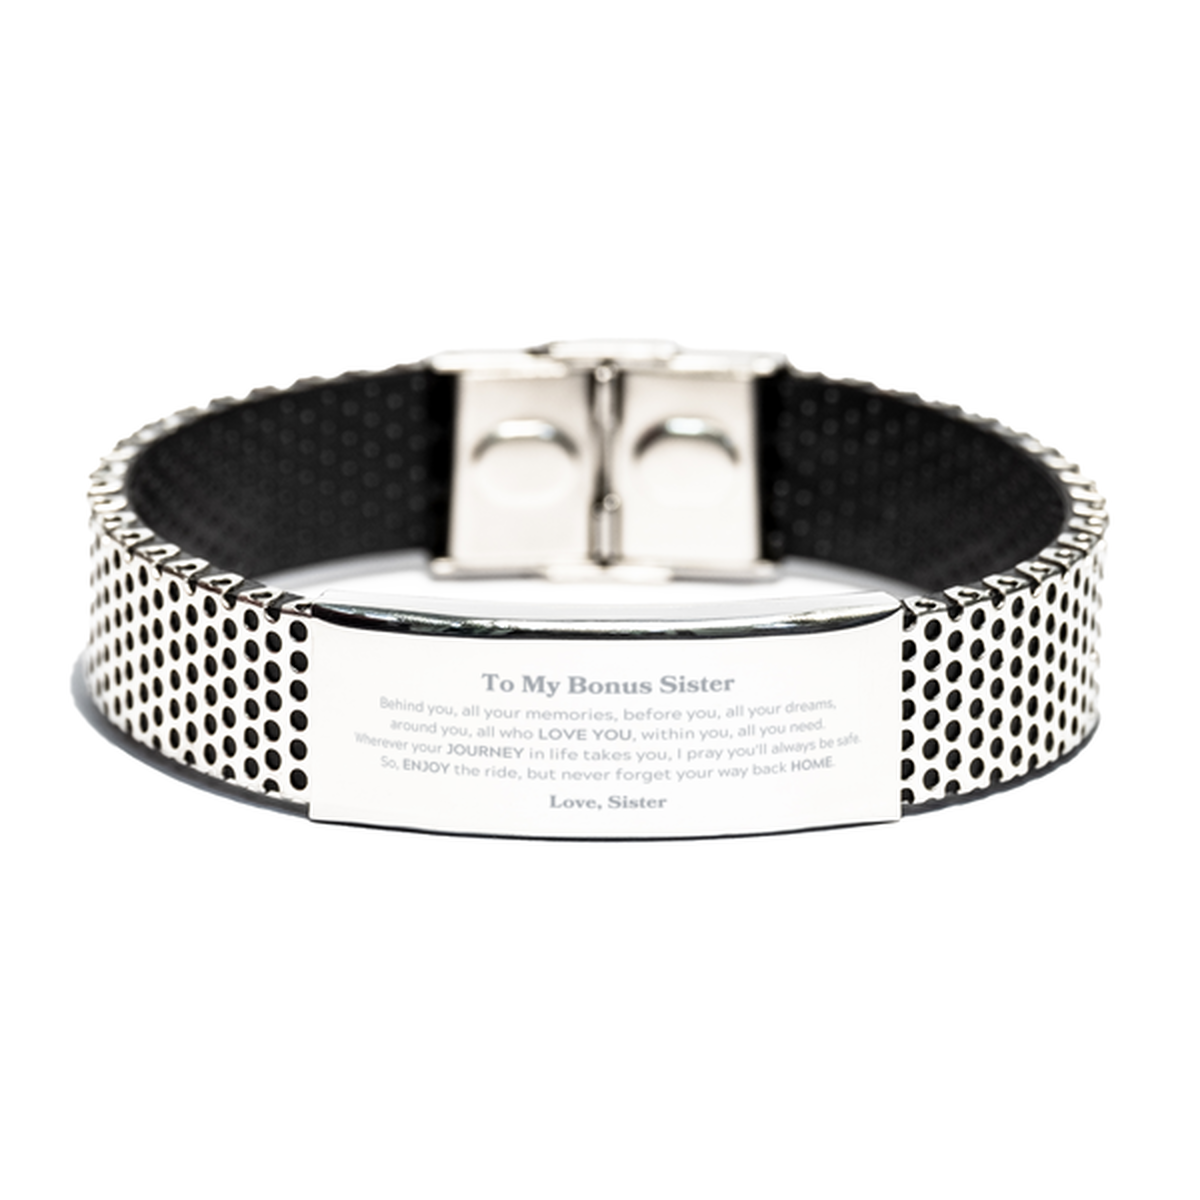 To My Bonus Sister Graduation Gifts from Sister, Bonus Sister Stainless Steel Bracelet Christmas Birthday Gifts for Bonus Sister Behind you, all your memories, before you, all your dreams. Love, Sister